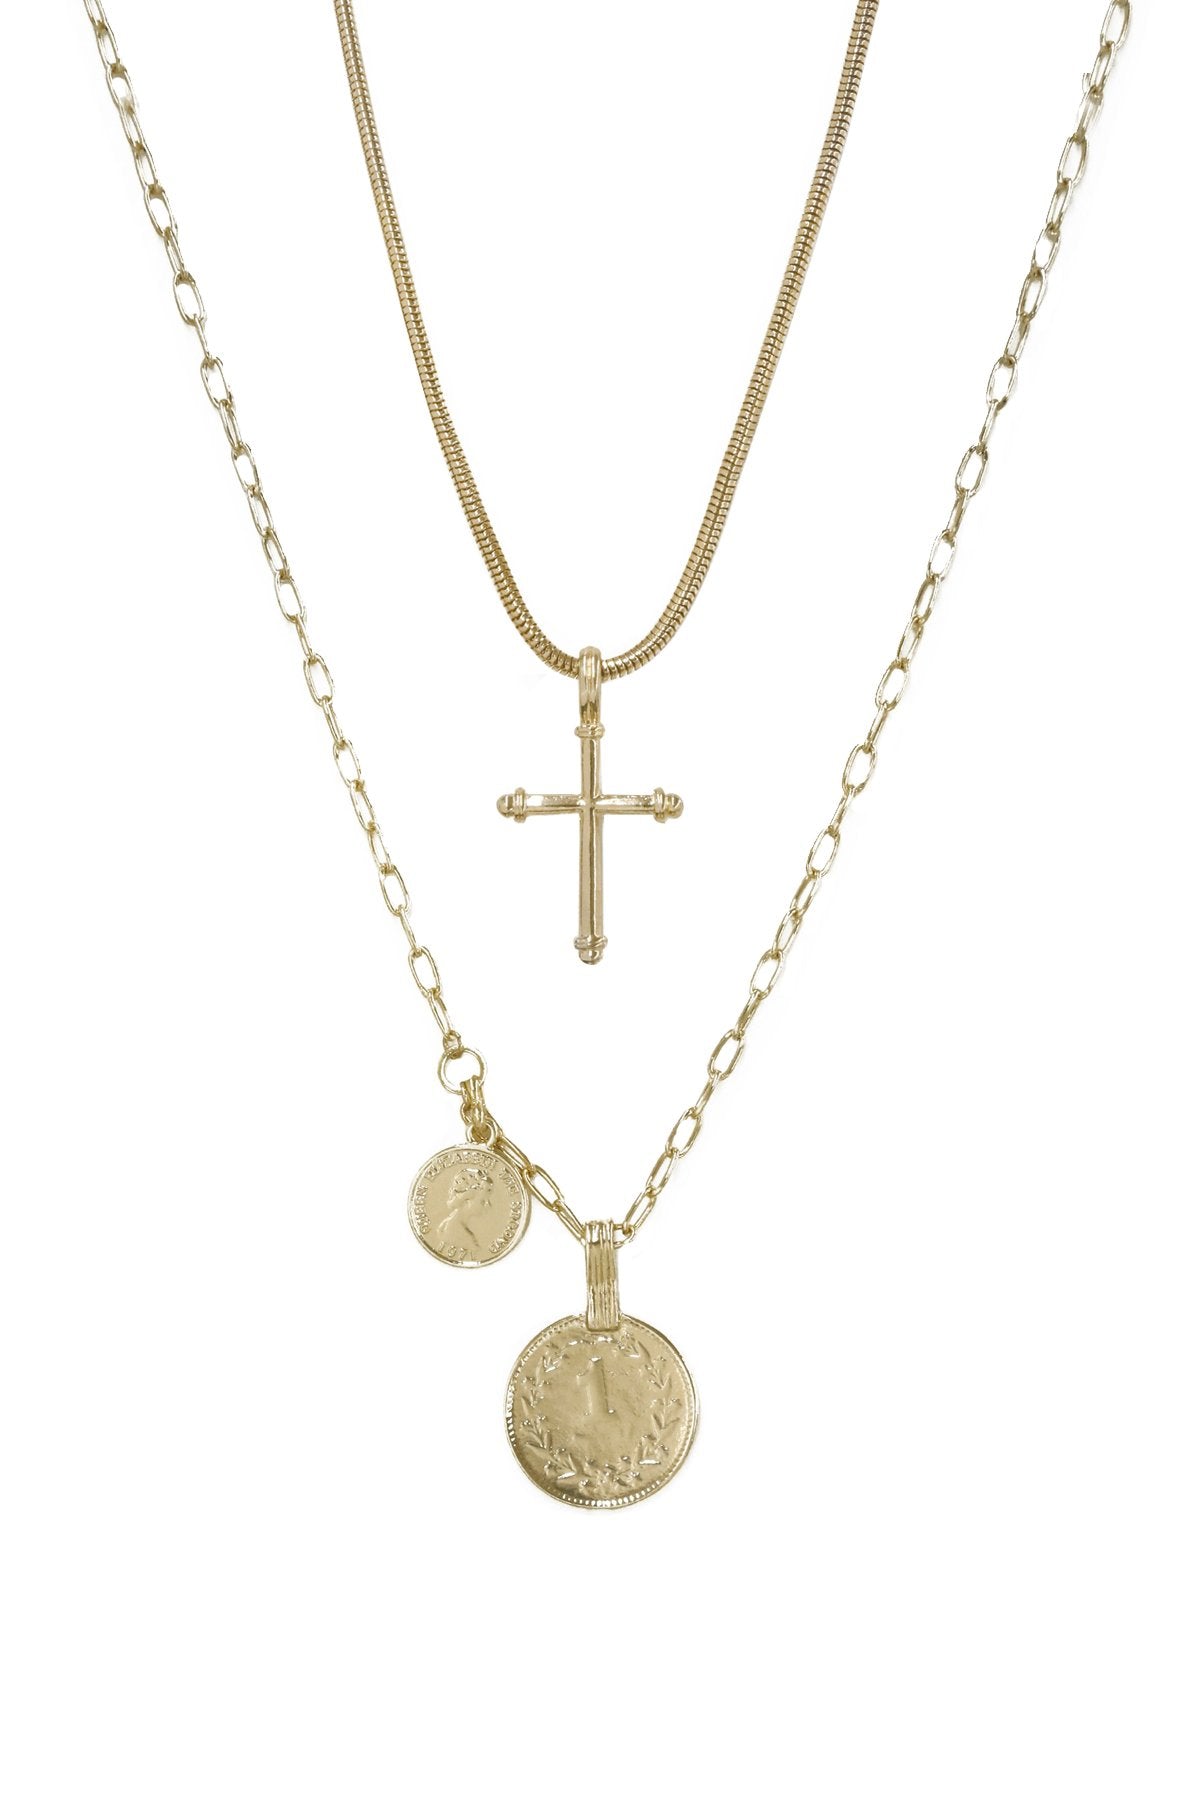 Keep the Faith 18k Gold Plated Cross and Coin Necklace Set on white background  